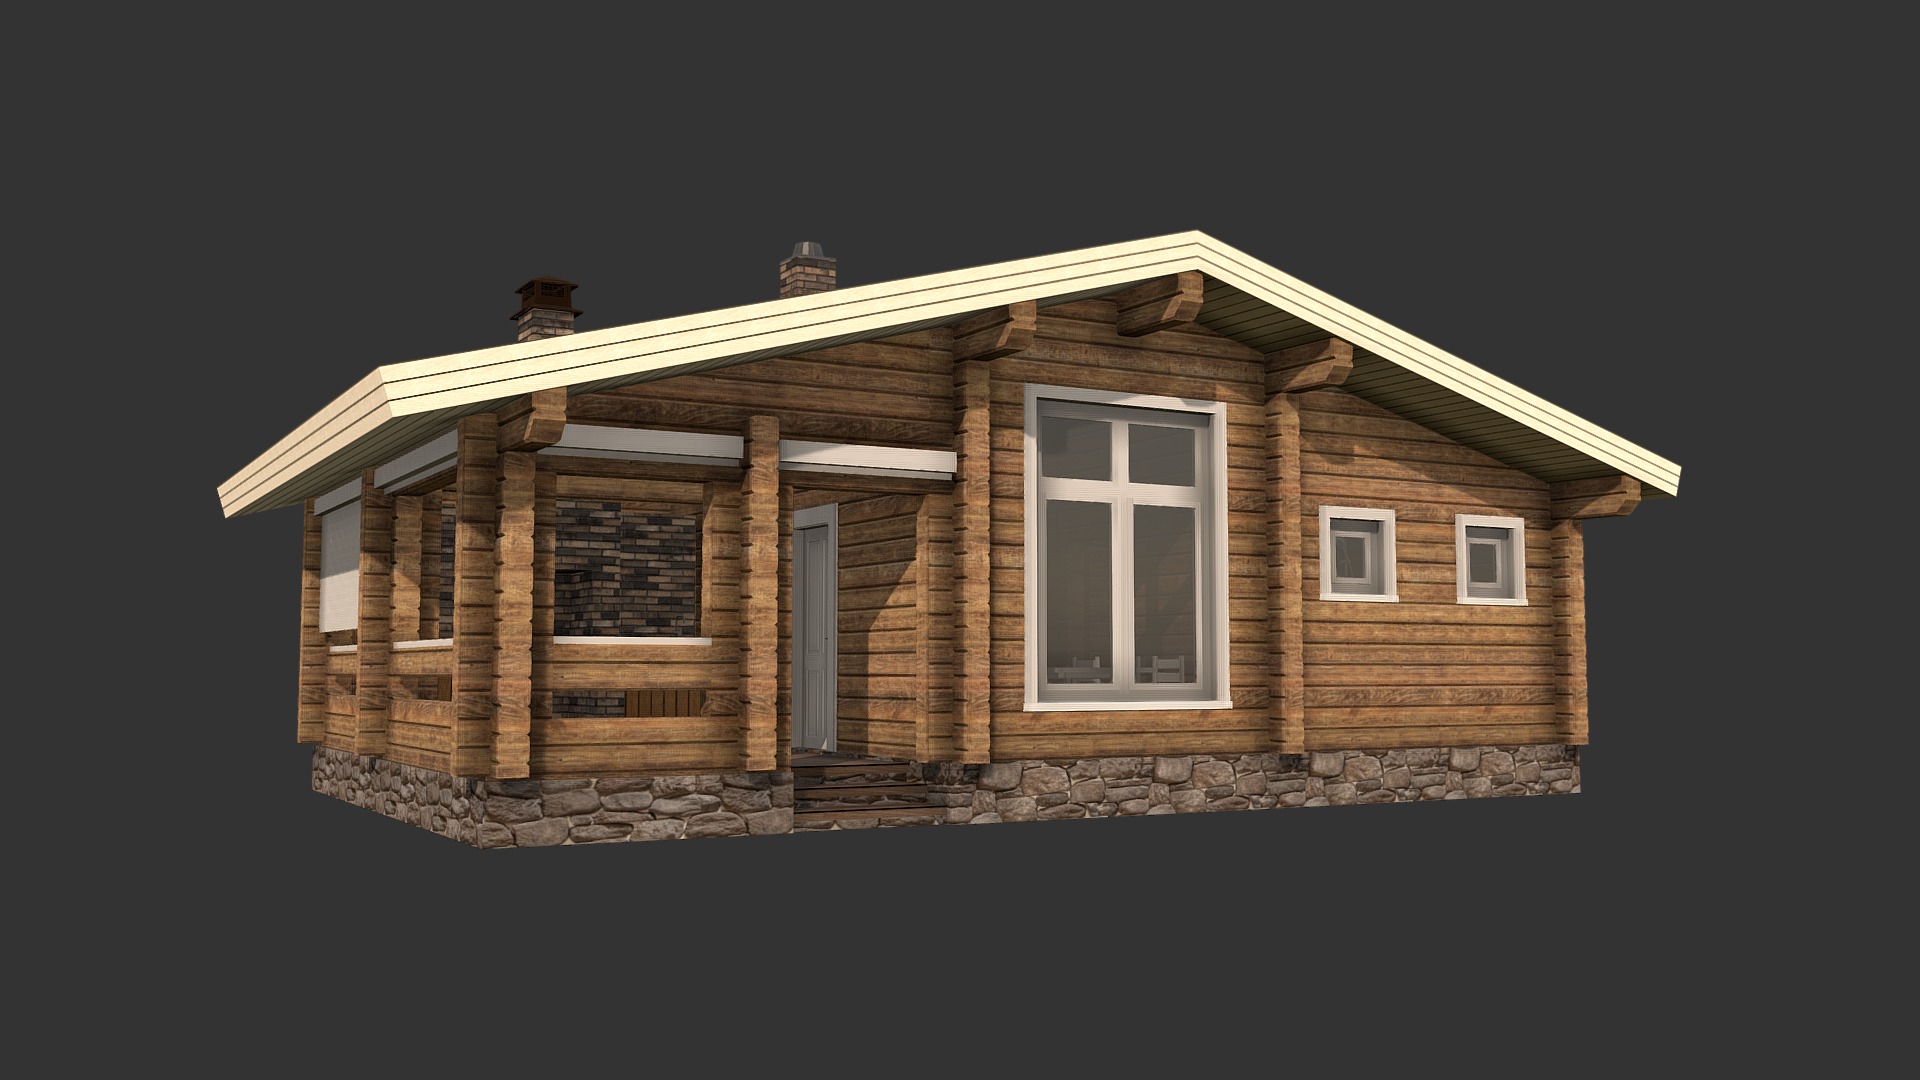 3D model Баня 2 (Константин) - This is a 3D model of the Баня 2 (Константин). The 3D model is about a brick house with a white roof.